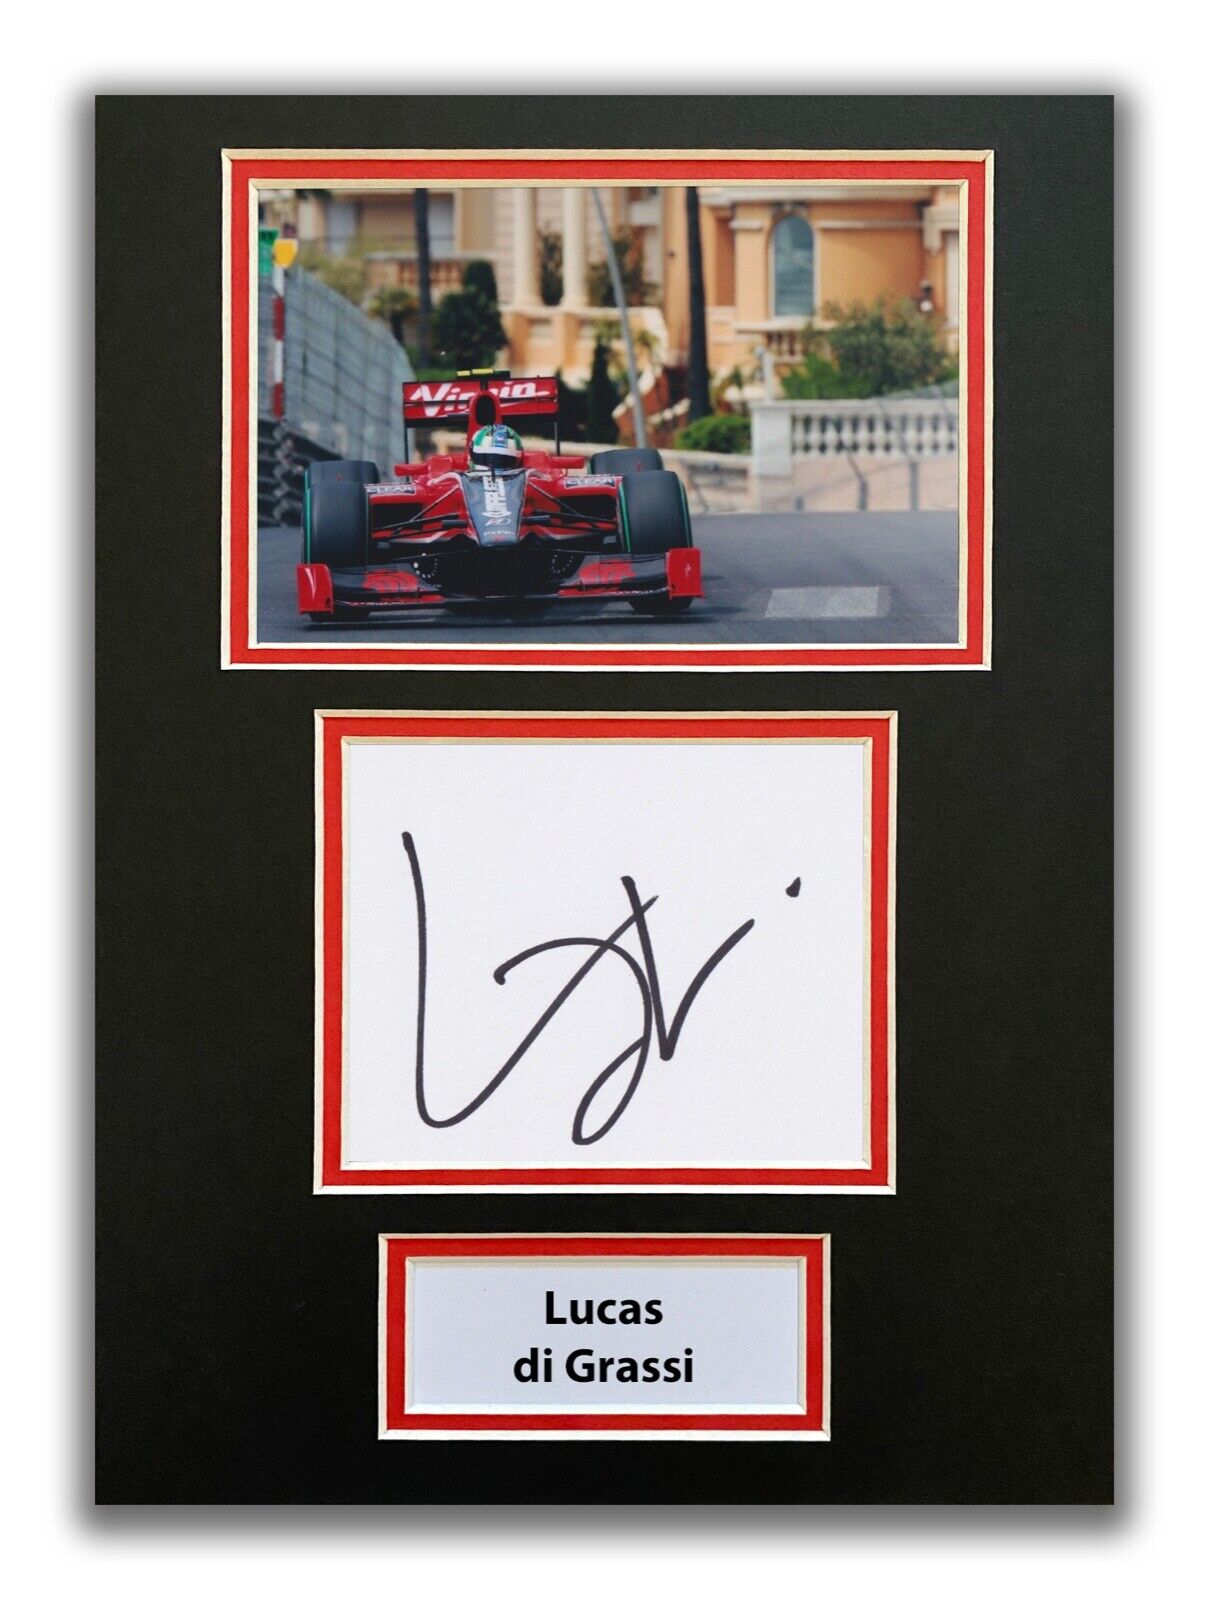 LUCAS DI GRASSI HAND SIGNED A4 MOUNTED Photo Poster painting DISPLAY - F1 AUTOGRAPH.